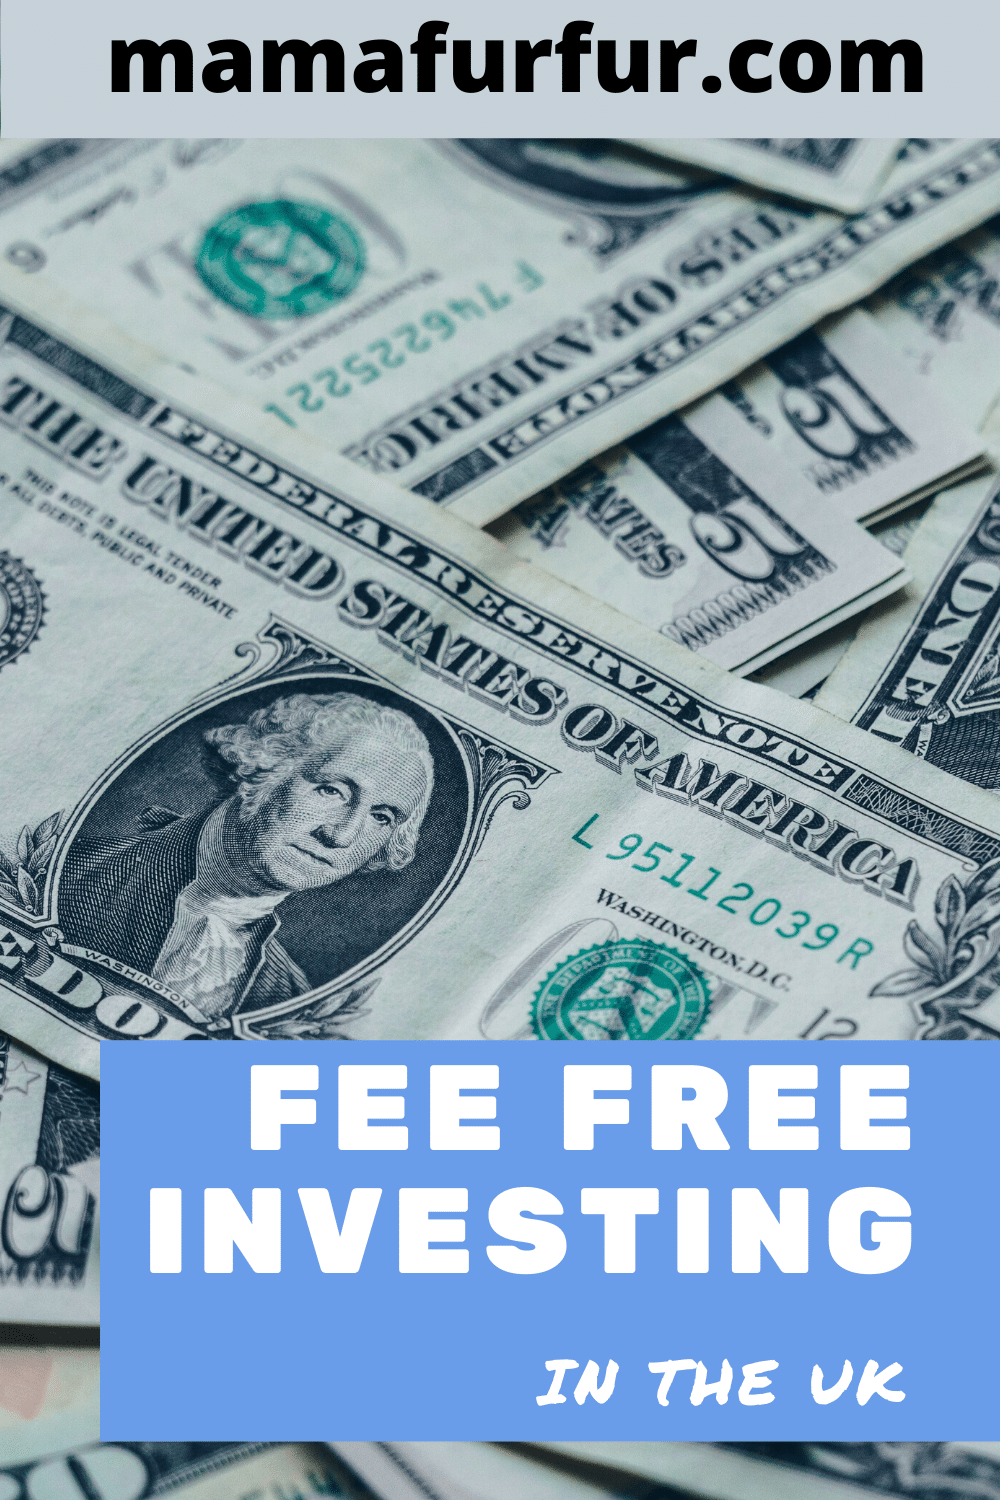 Fee Free Investing in the UK - Trading212 Vs Freetrade - Which is better?